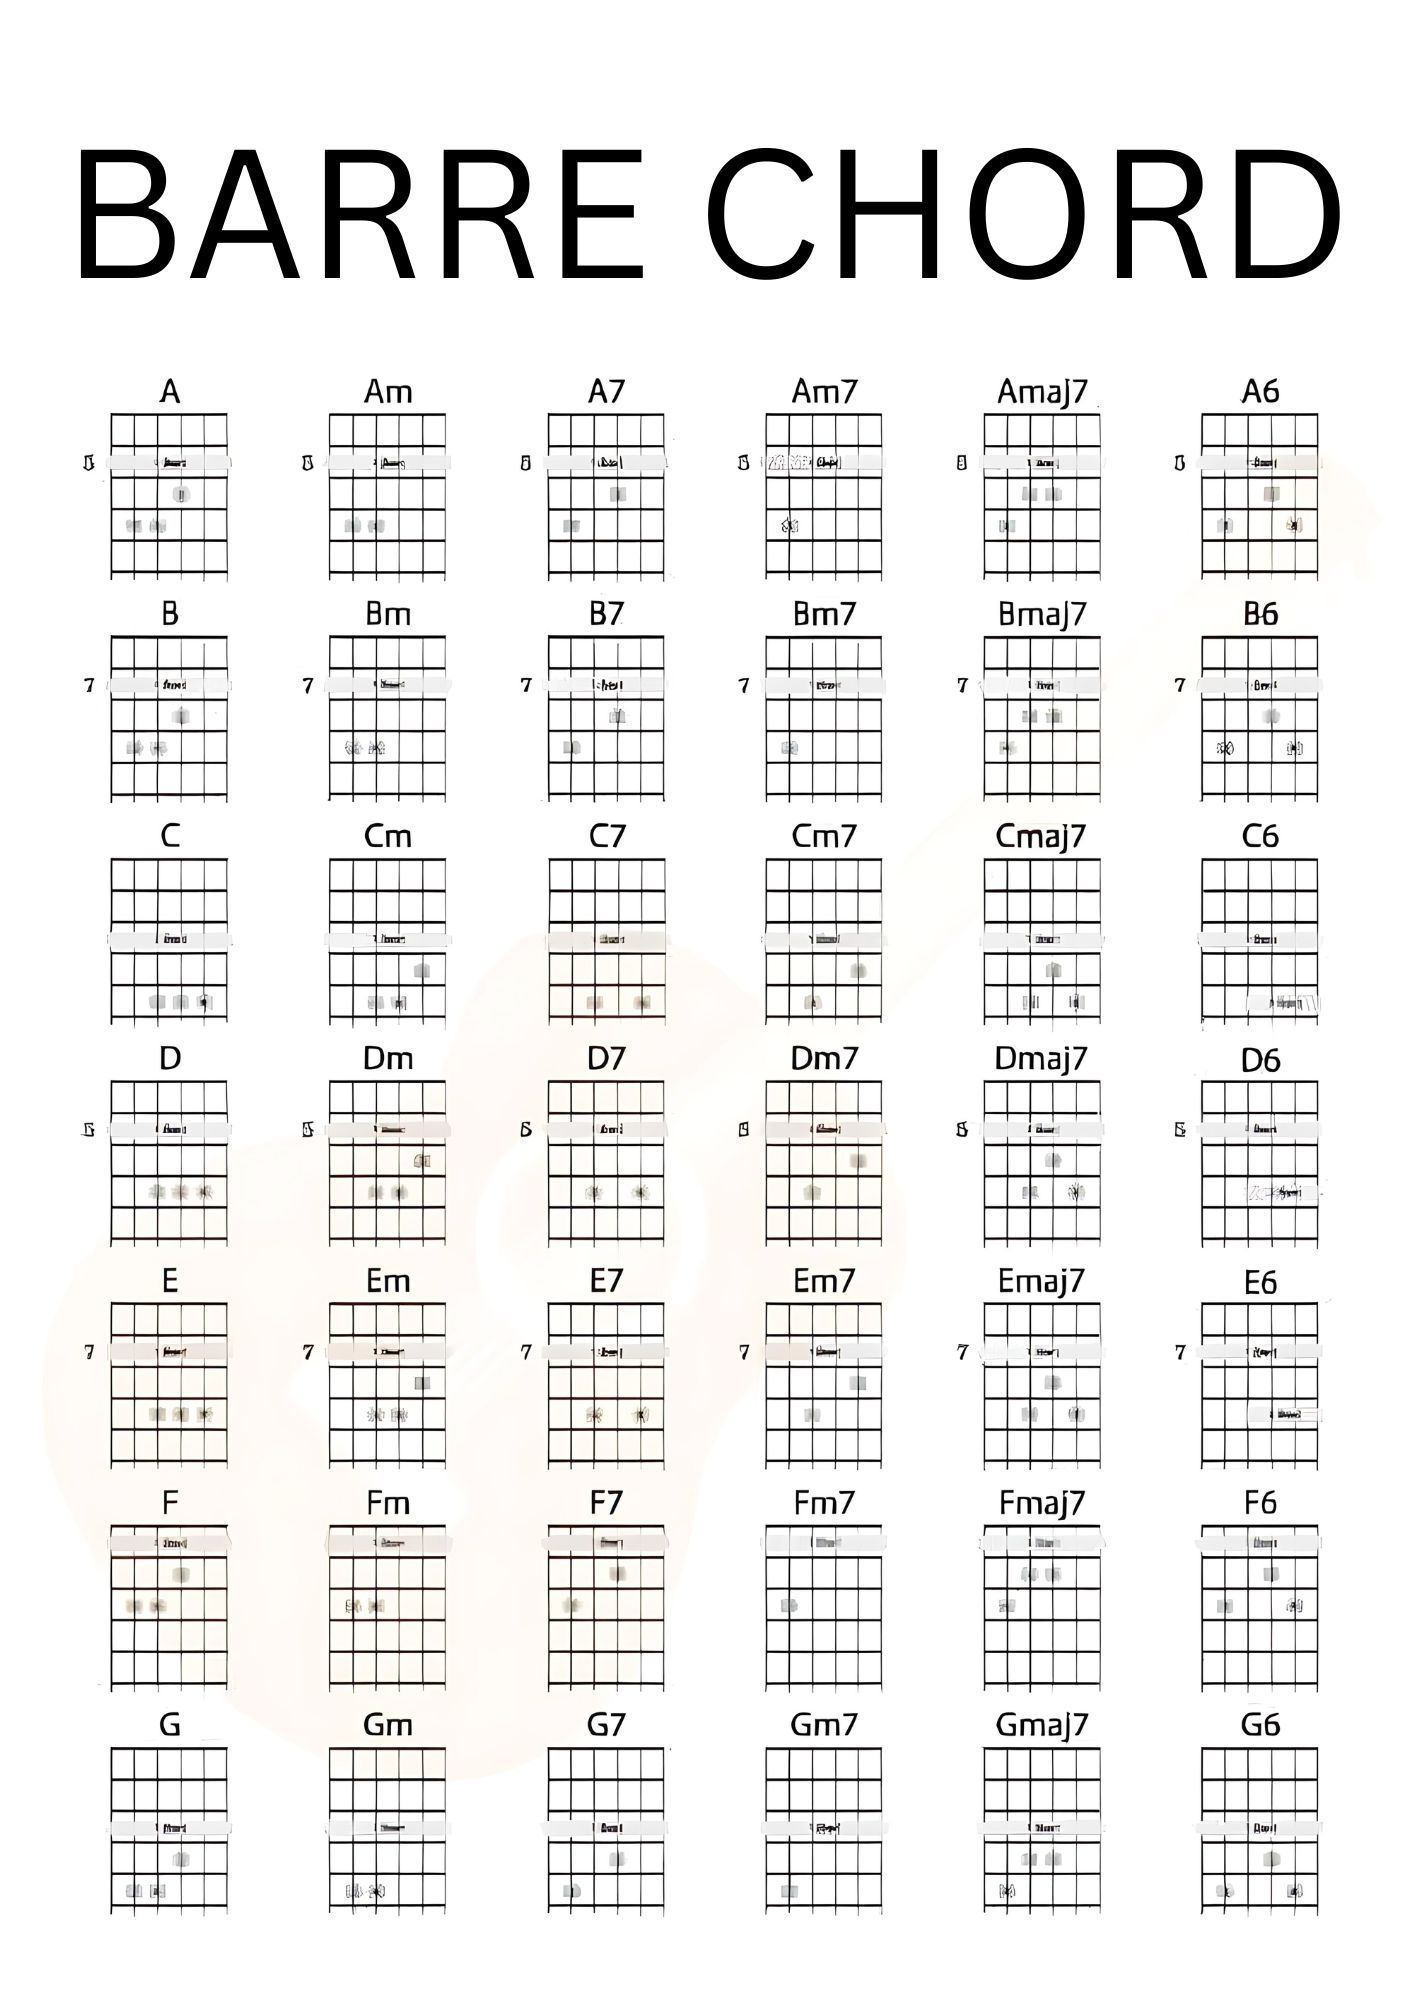 Mastering Barre Chords and Power Chords on Guitar: A Deep Dive